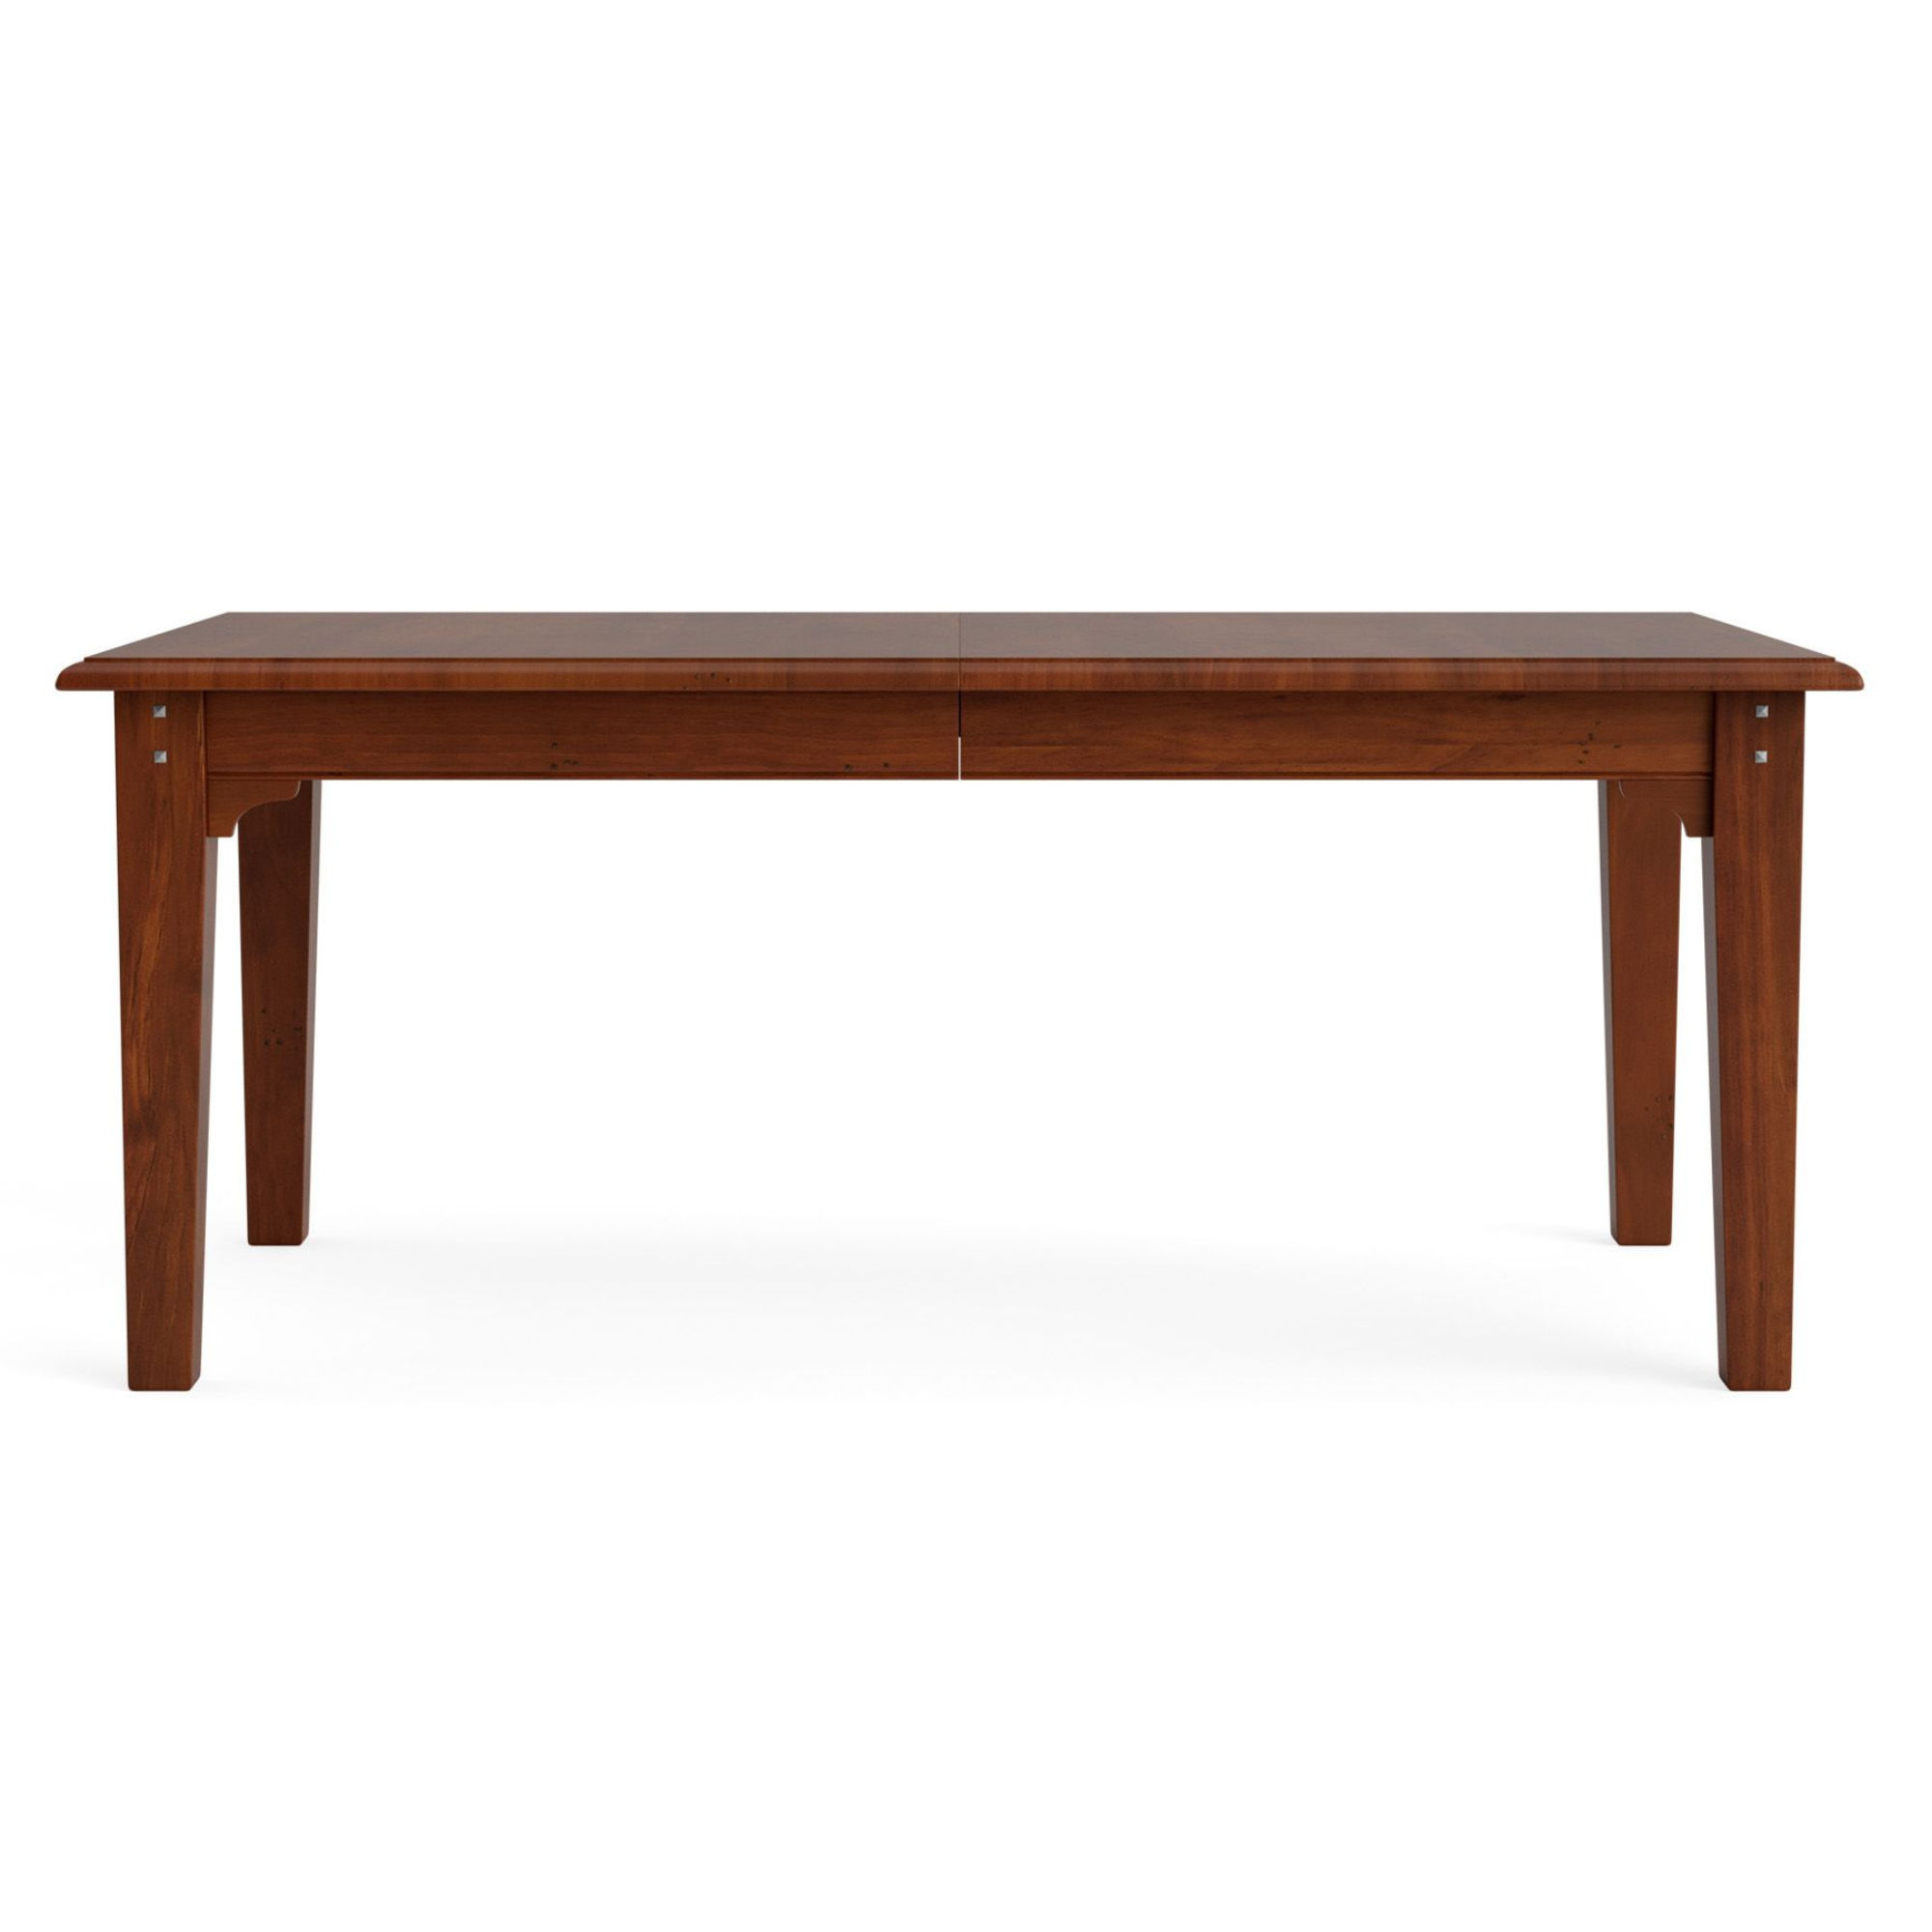 VILLAGER 1800 EXTENSION TABLE | NZ MADE